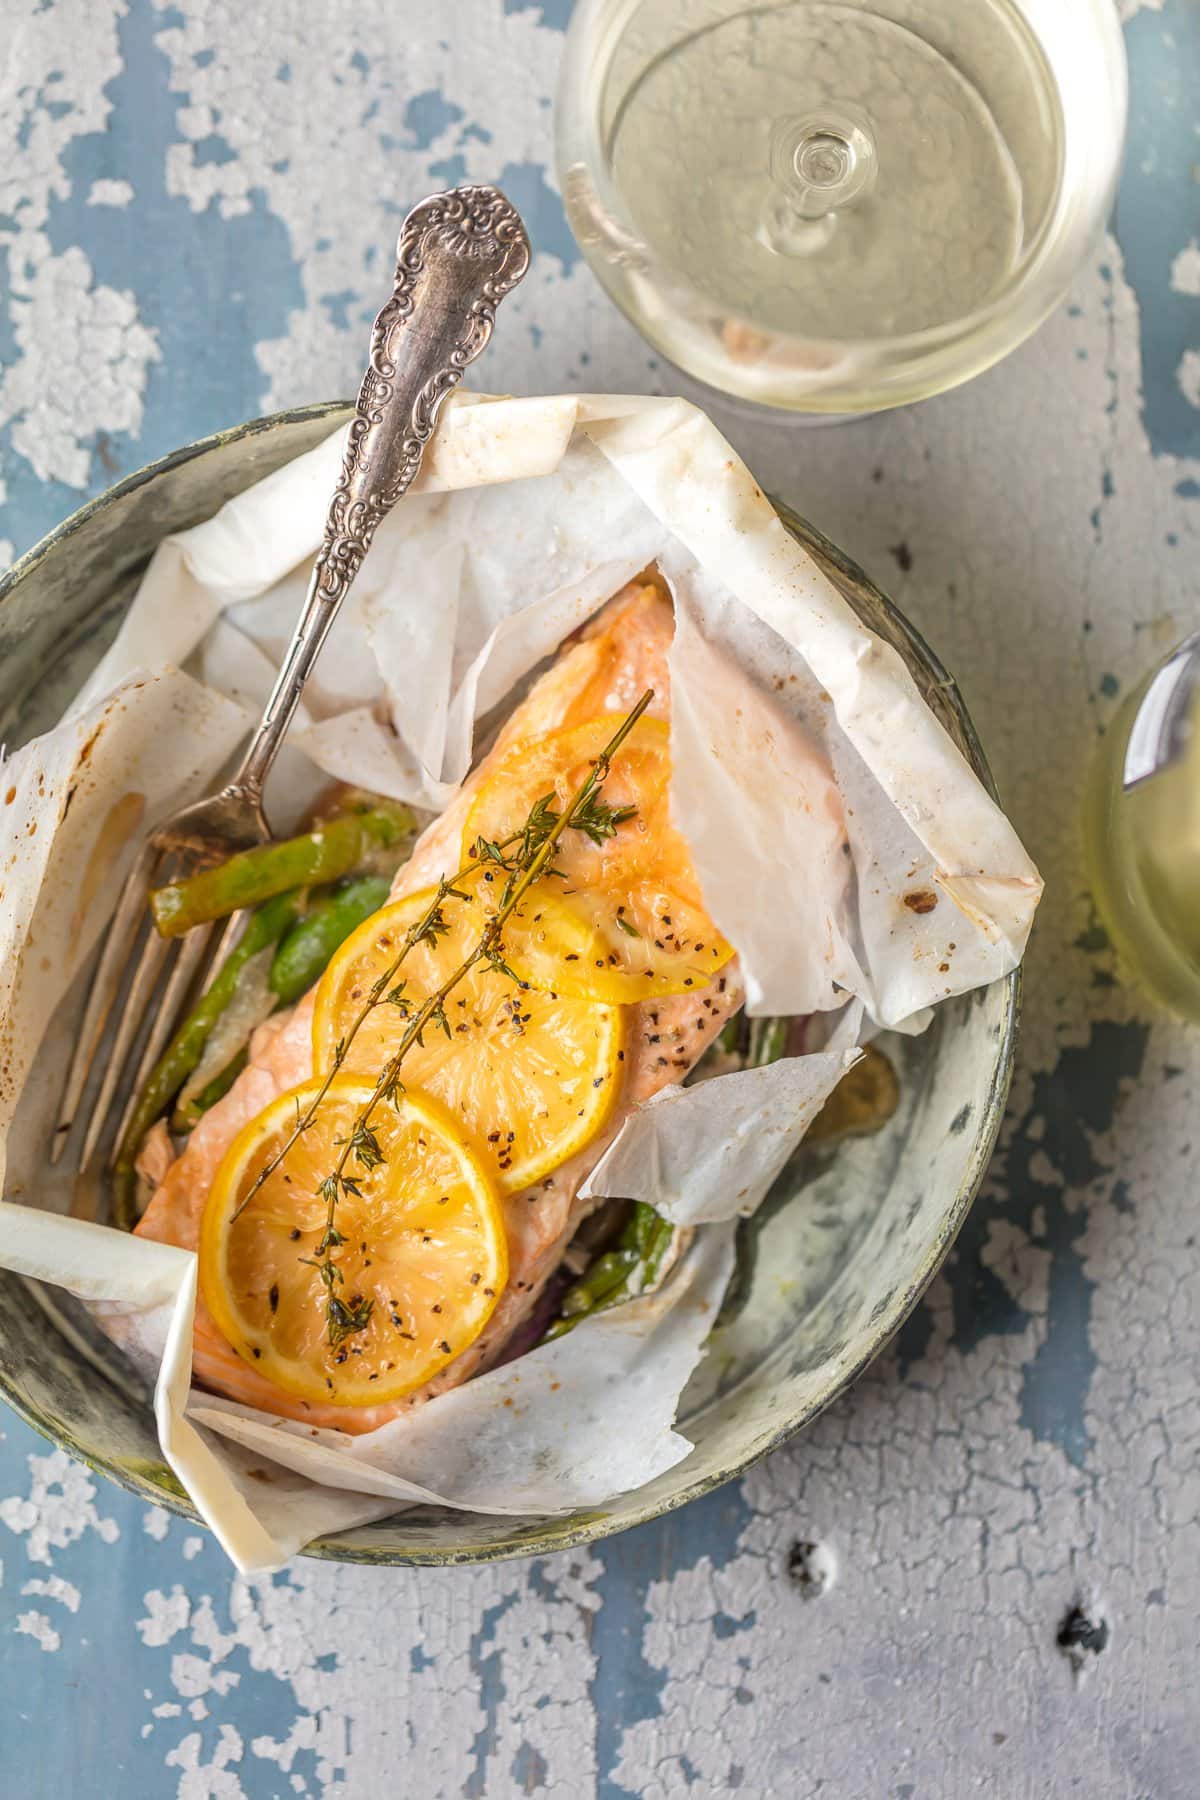 https://www.thecookierookie.com/wp-content/uploads/2017/02/lemon-butter-salmon-in-parchment-4-of-11.jpg